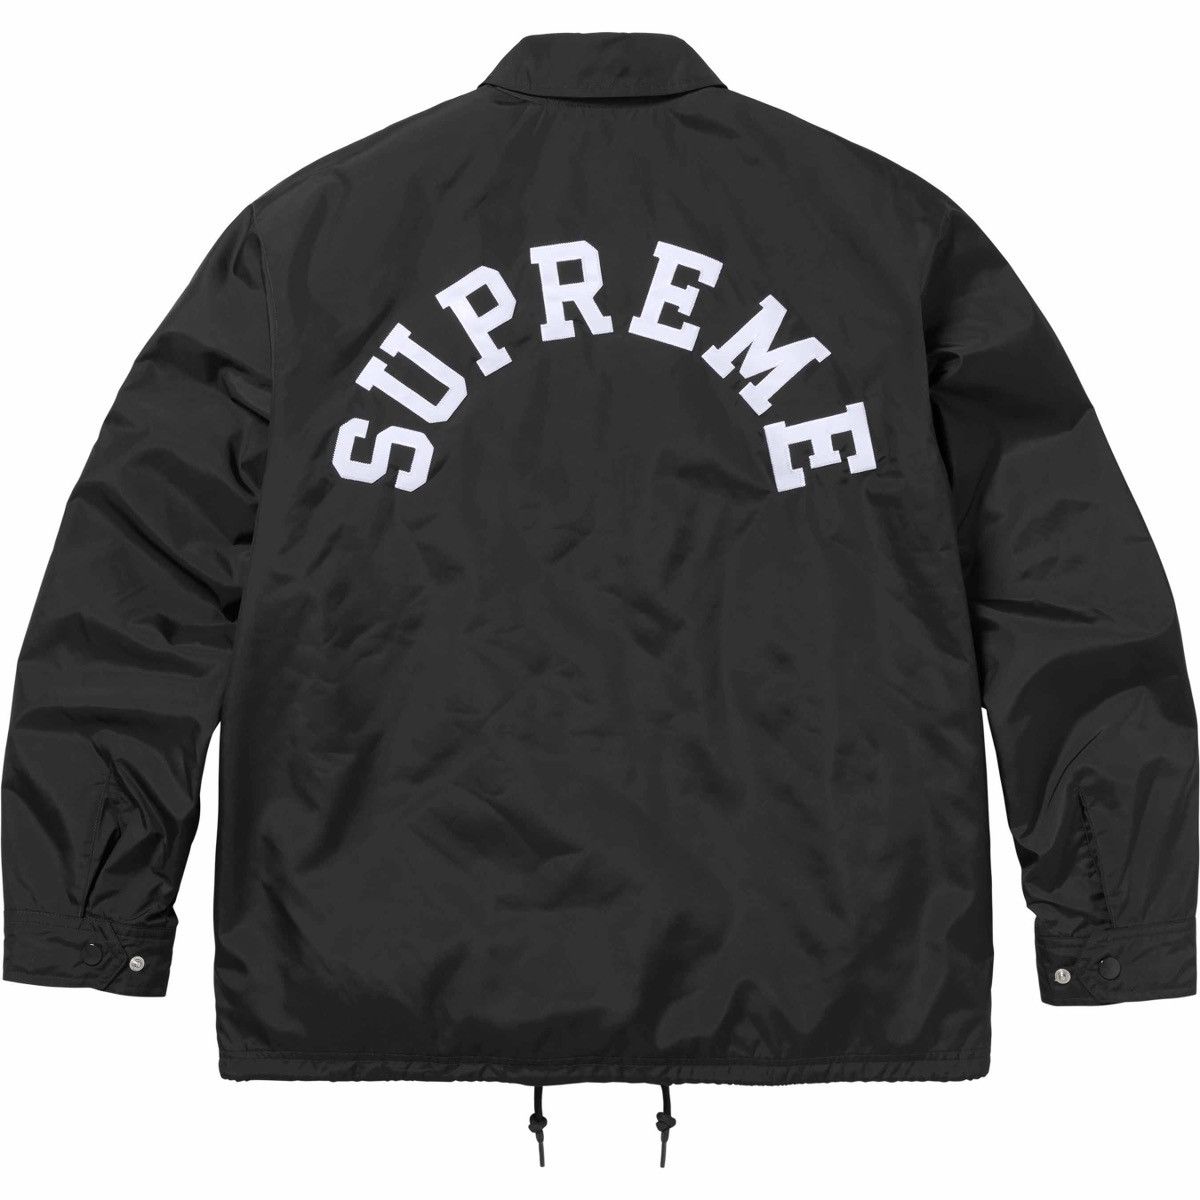 Supreme Supreme Champion Coaches Jacket Navy L in Hand | Grailed